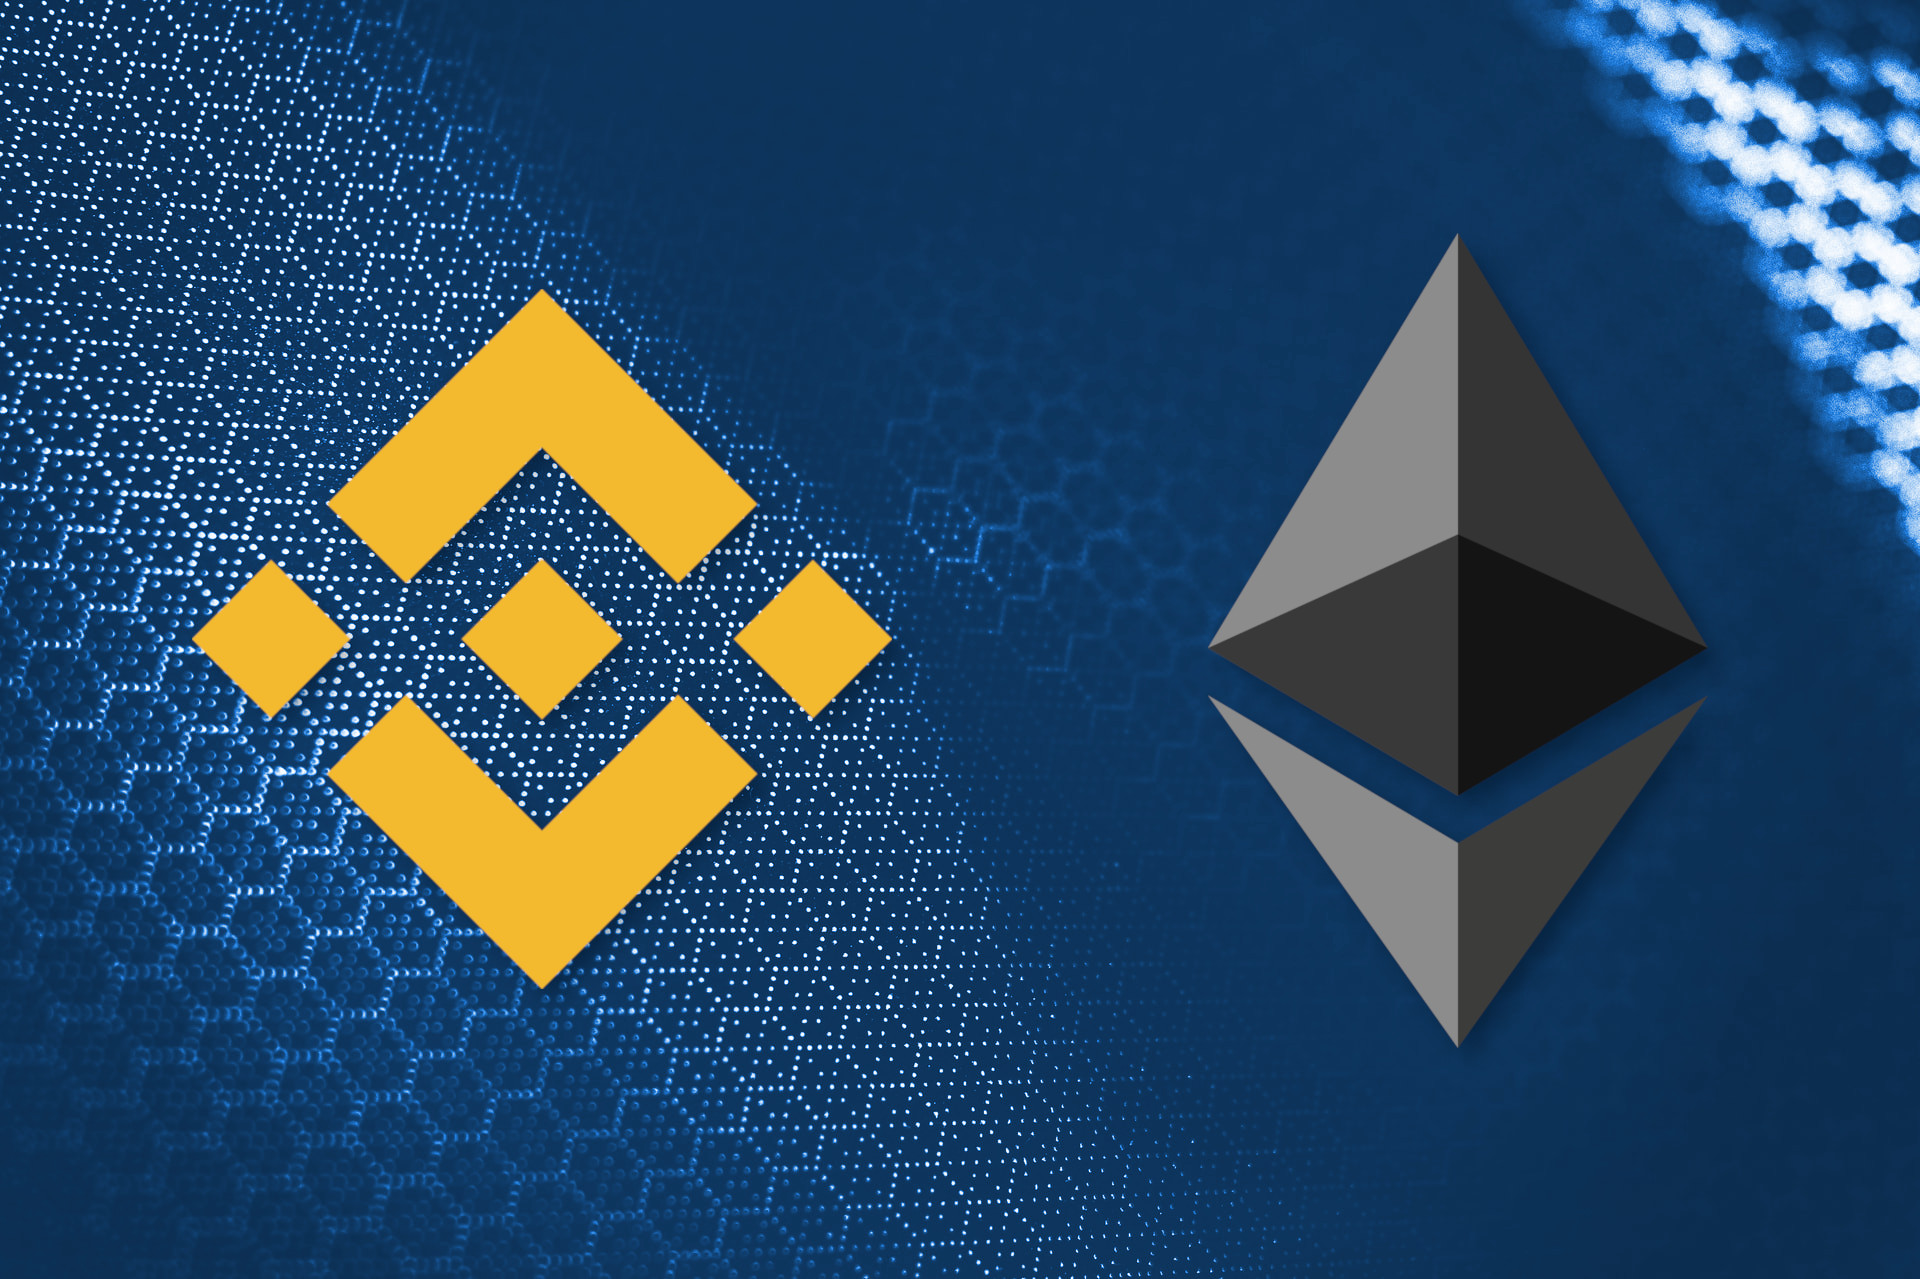 How to stake Ethereum and earn ETH 2.0 staking rewards on Binance